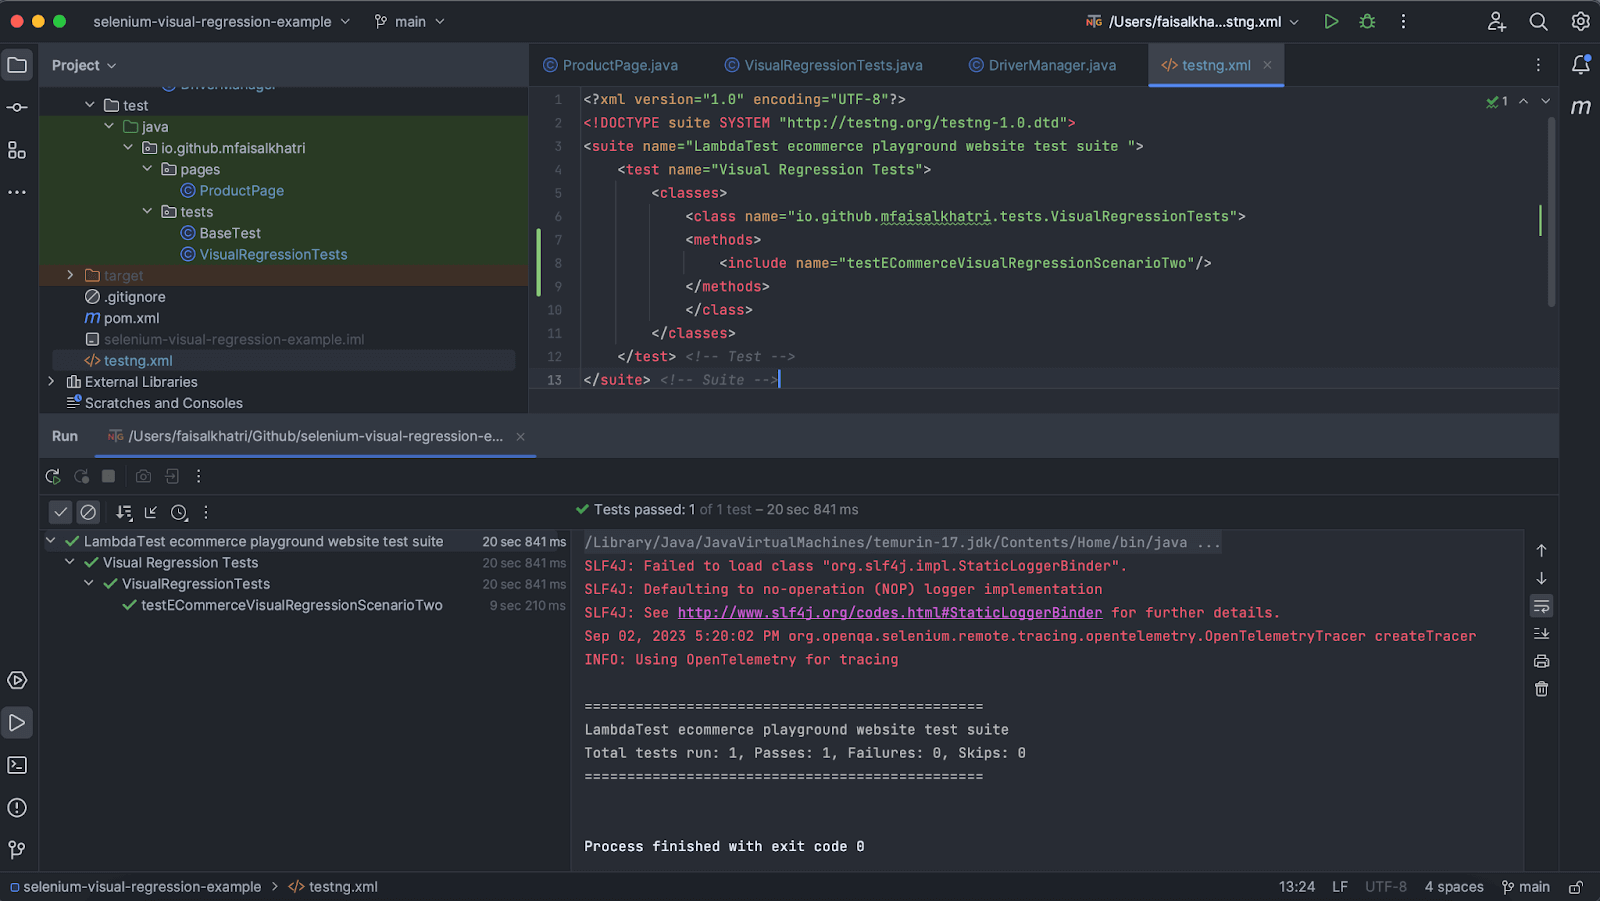  screenshot of the test execution from IntelliJ